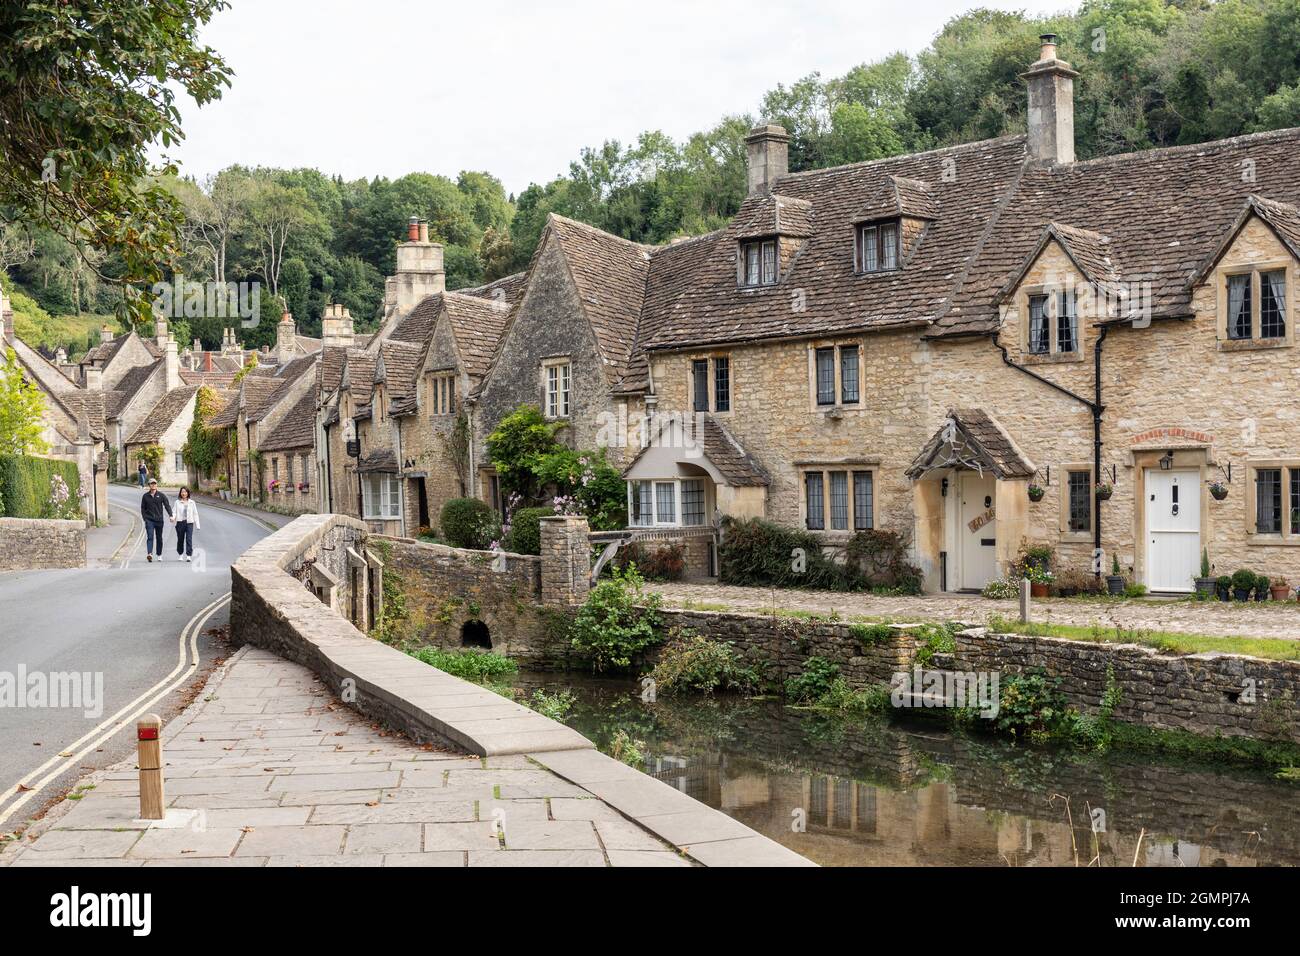 The picturesque traditional stone cottages alongside By Brook river bridge in the unspoilt Cotswold village of Castle Combe, Wiltshire, England, UK Stock Photo